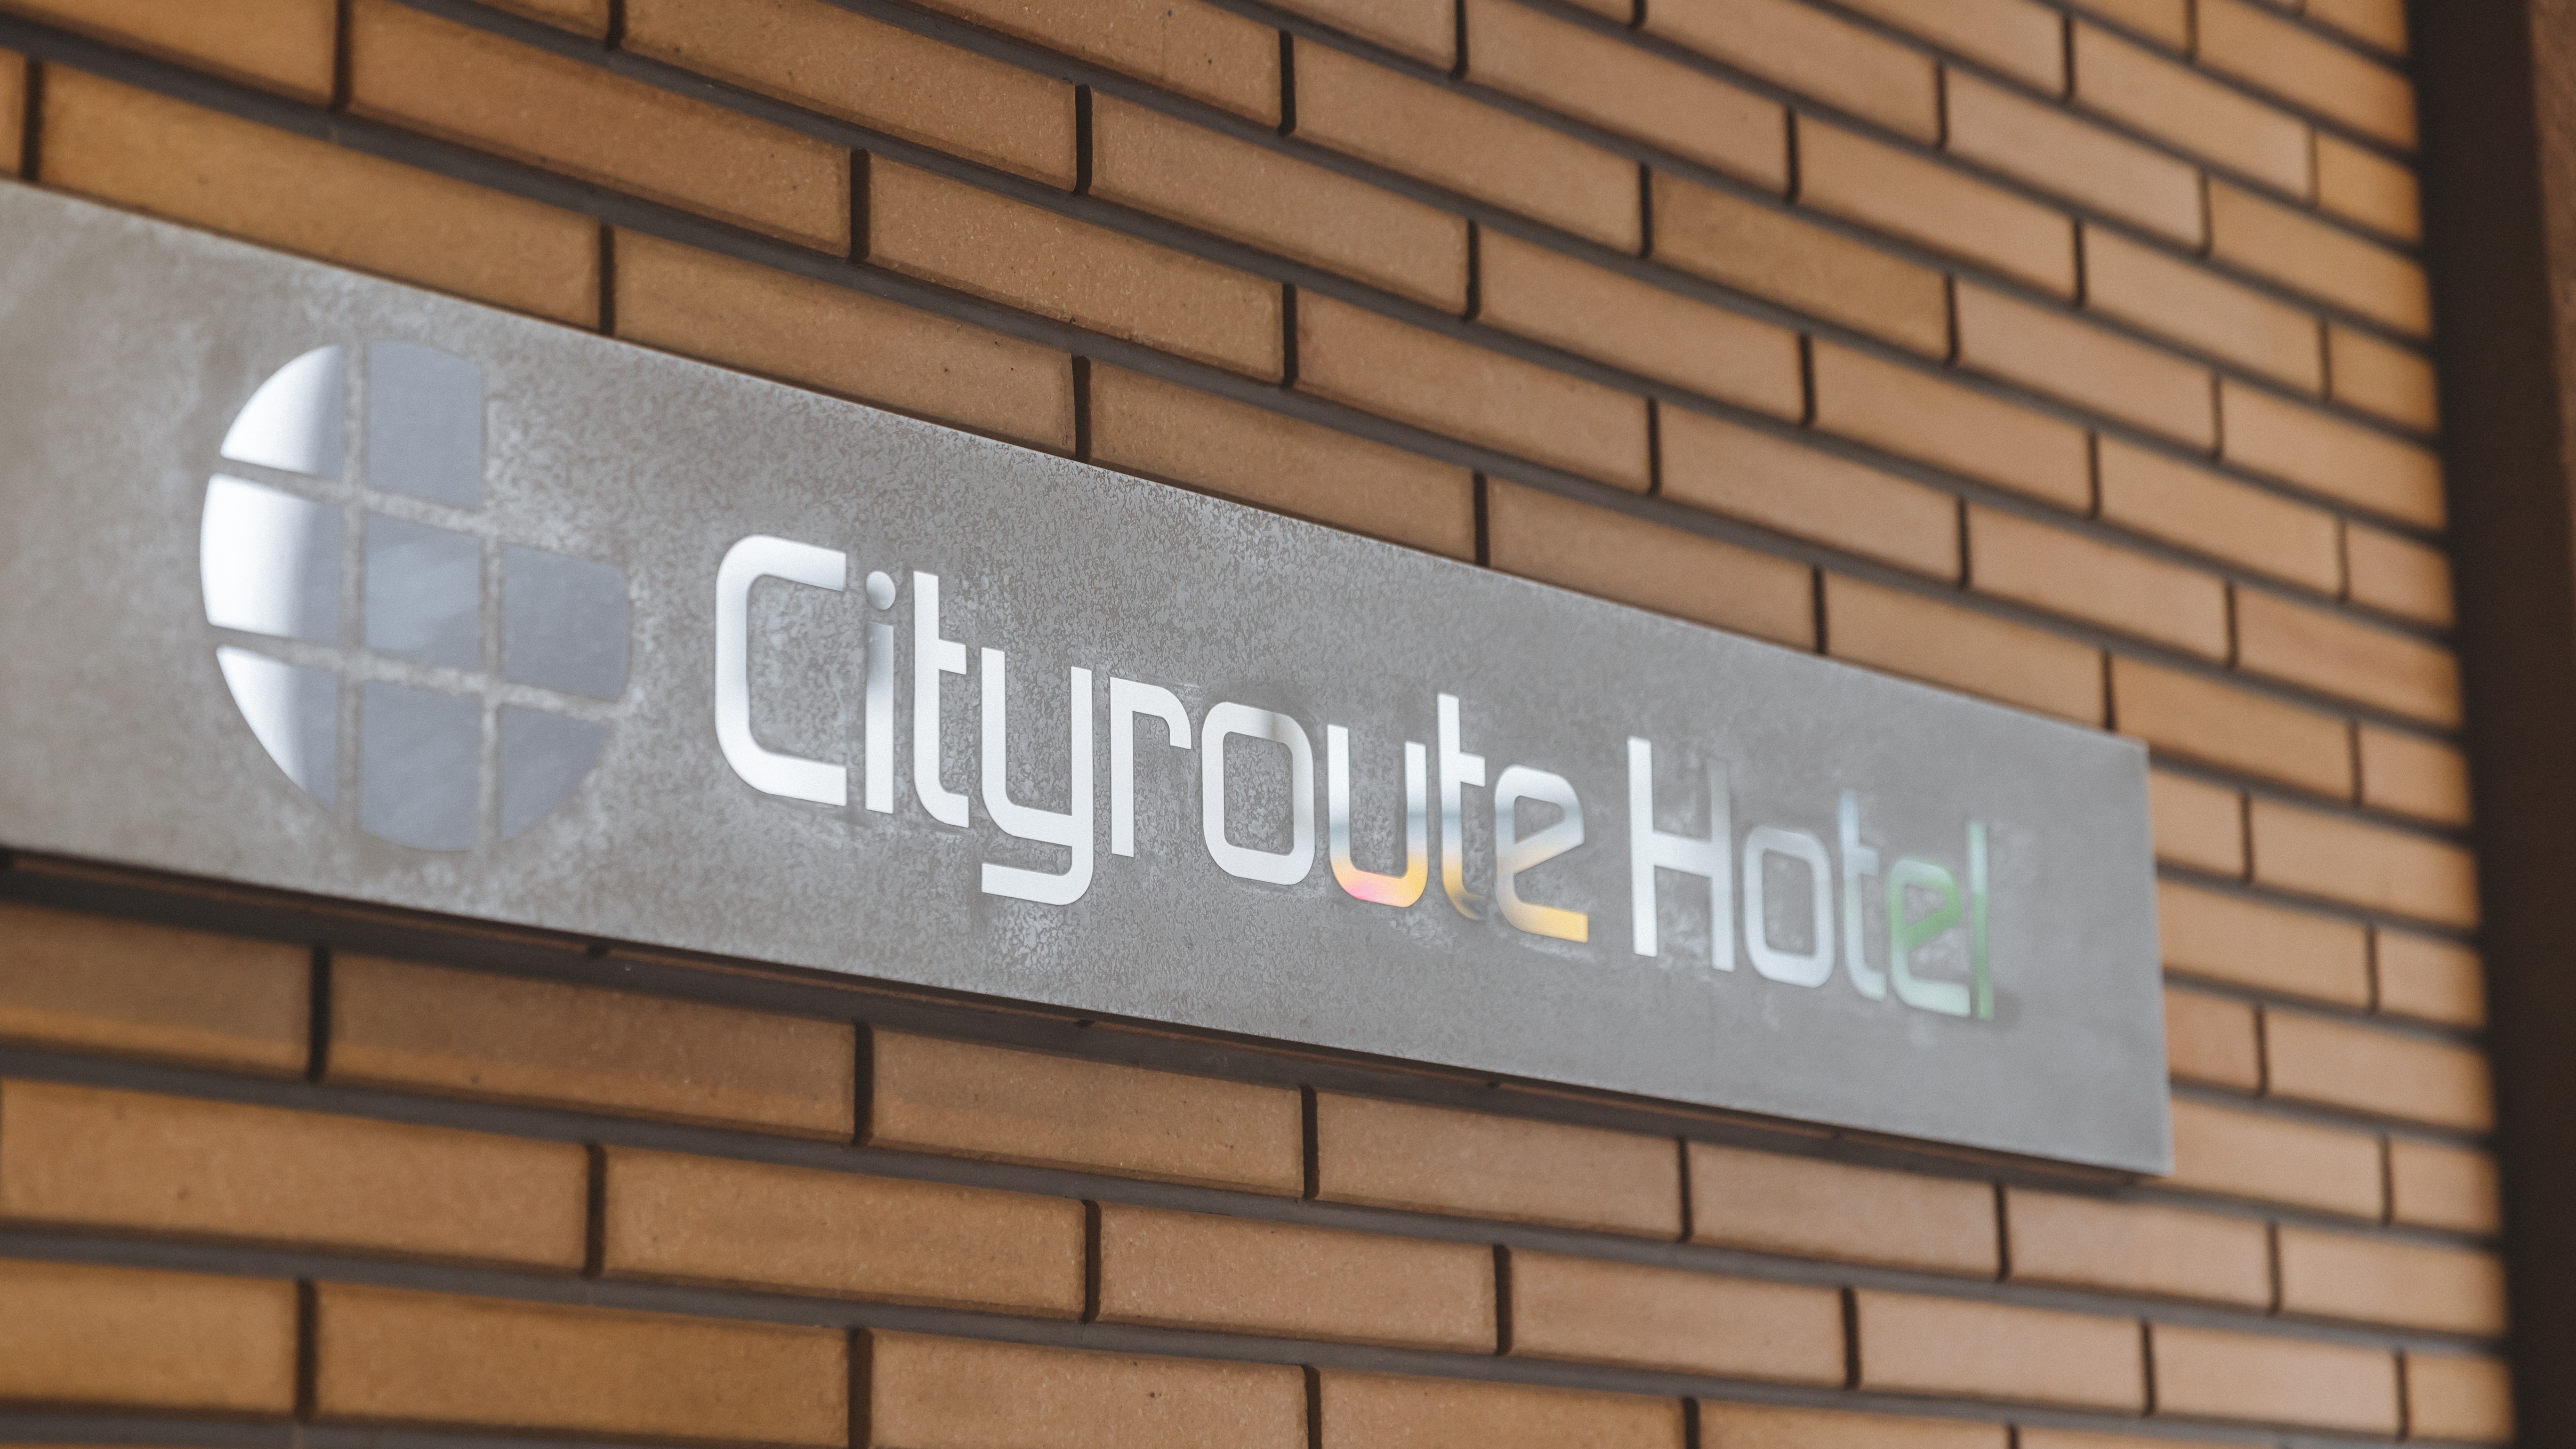 City Route Hotel